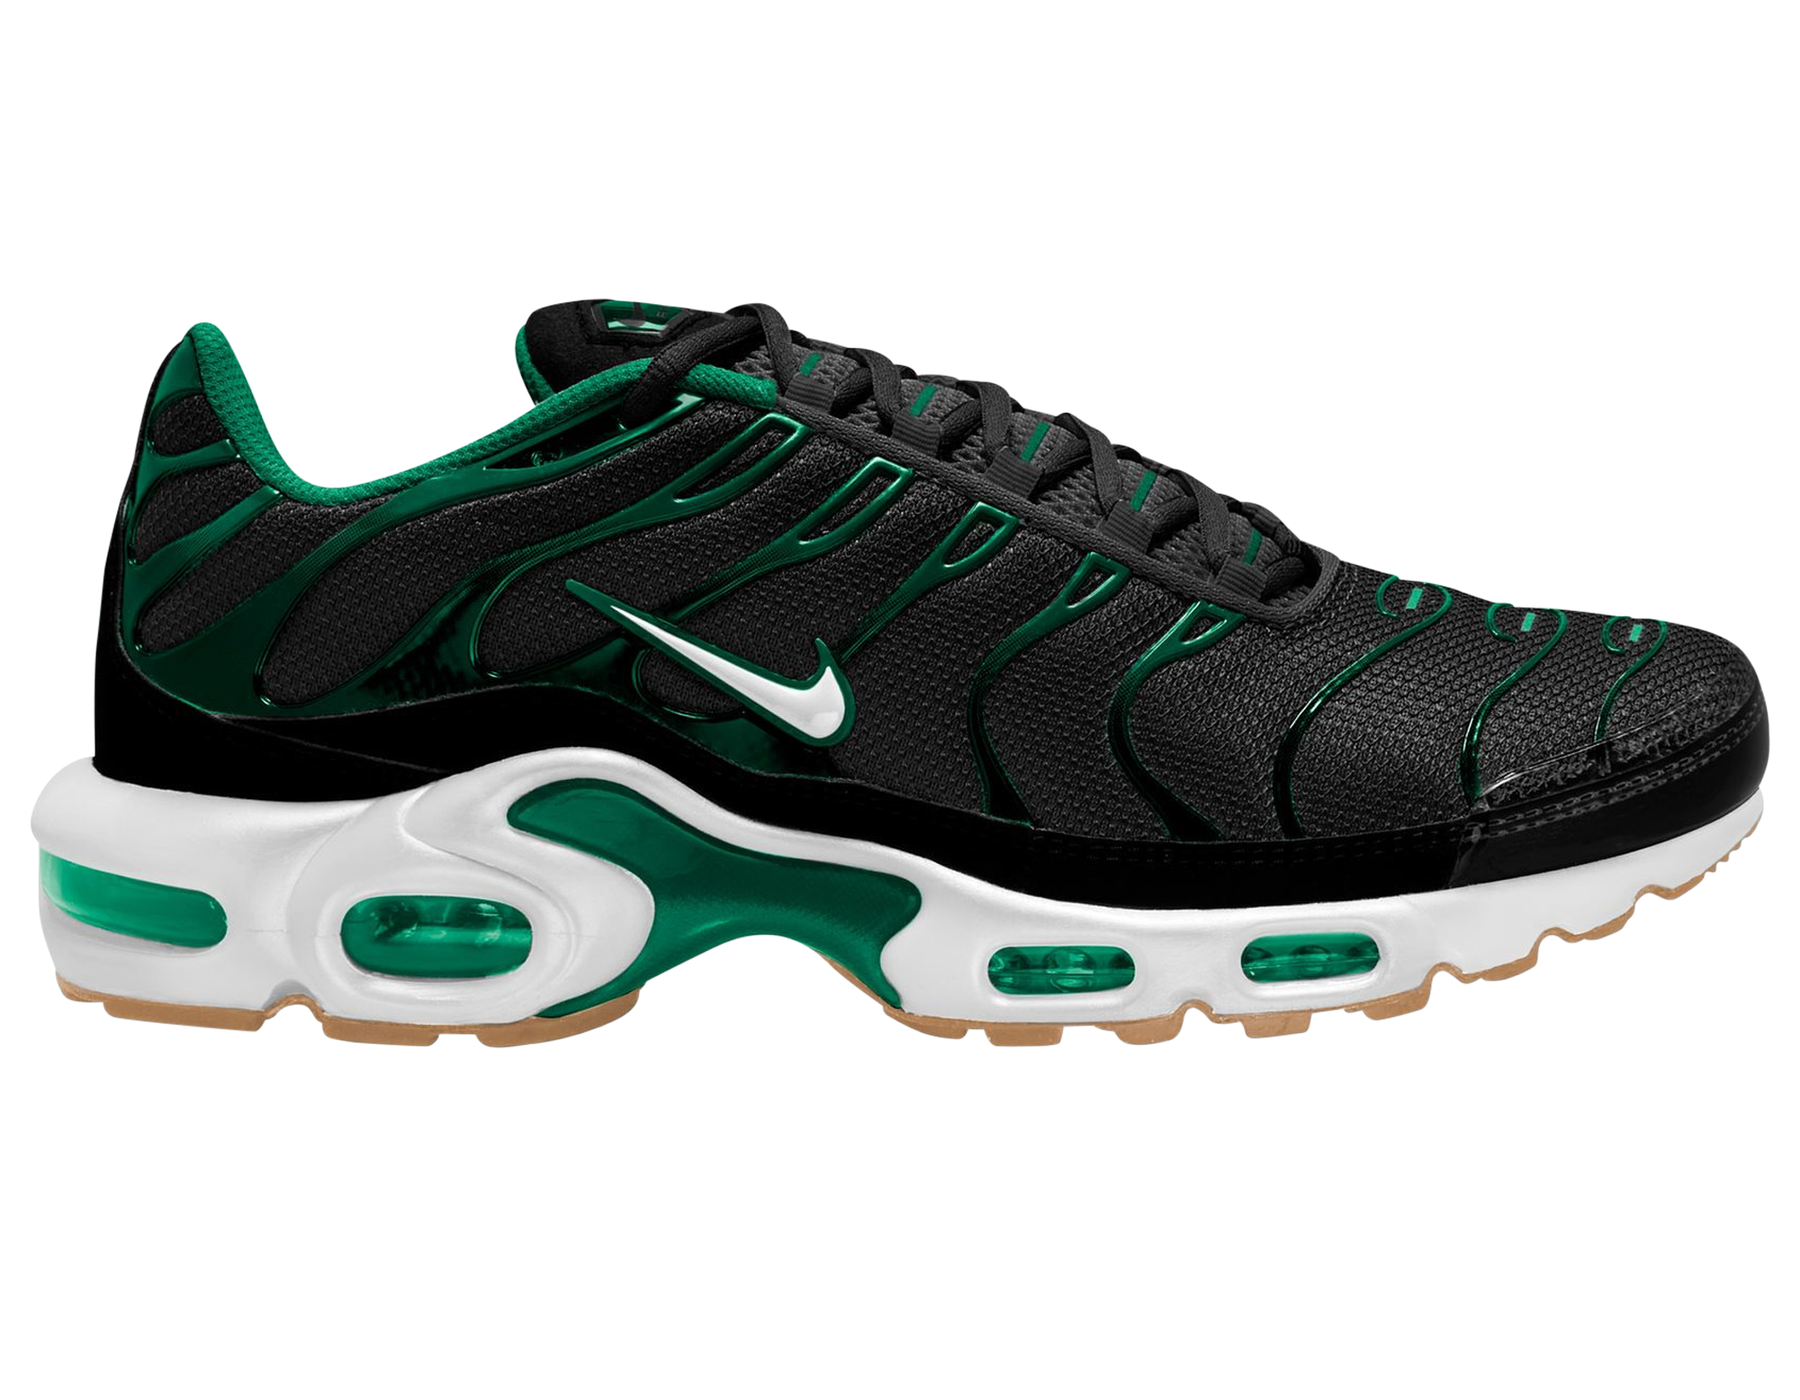 Nike Air Max Plus Surface in Black and Malachite With Gum Soles